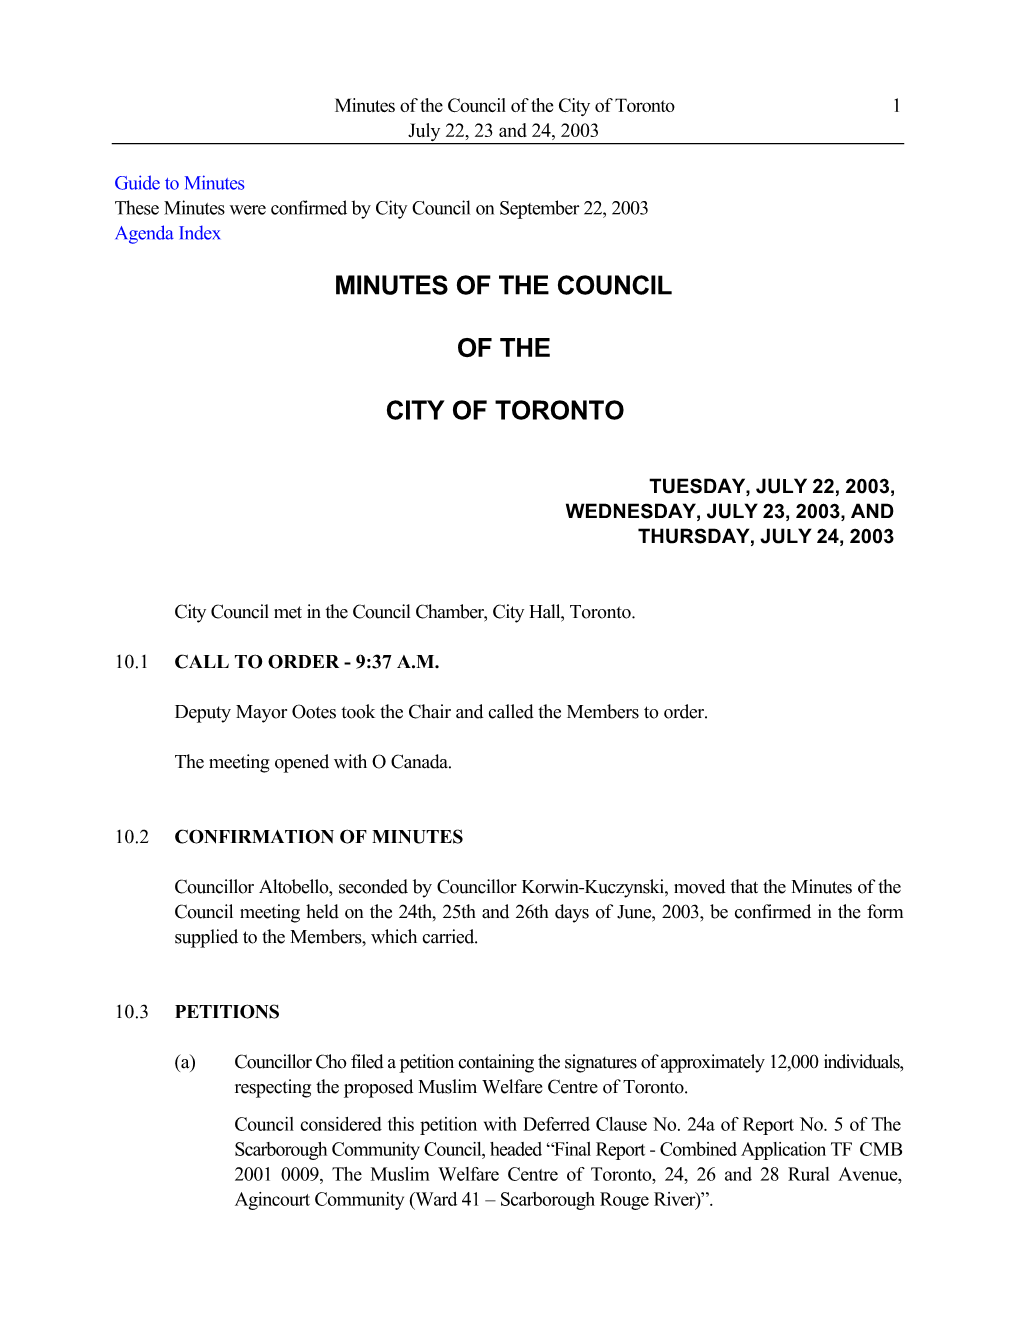 Minutes of the Council of the City of Toronto 1 July 22, 23 and 24, 2003